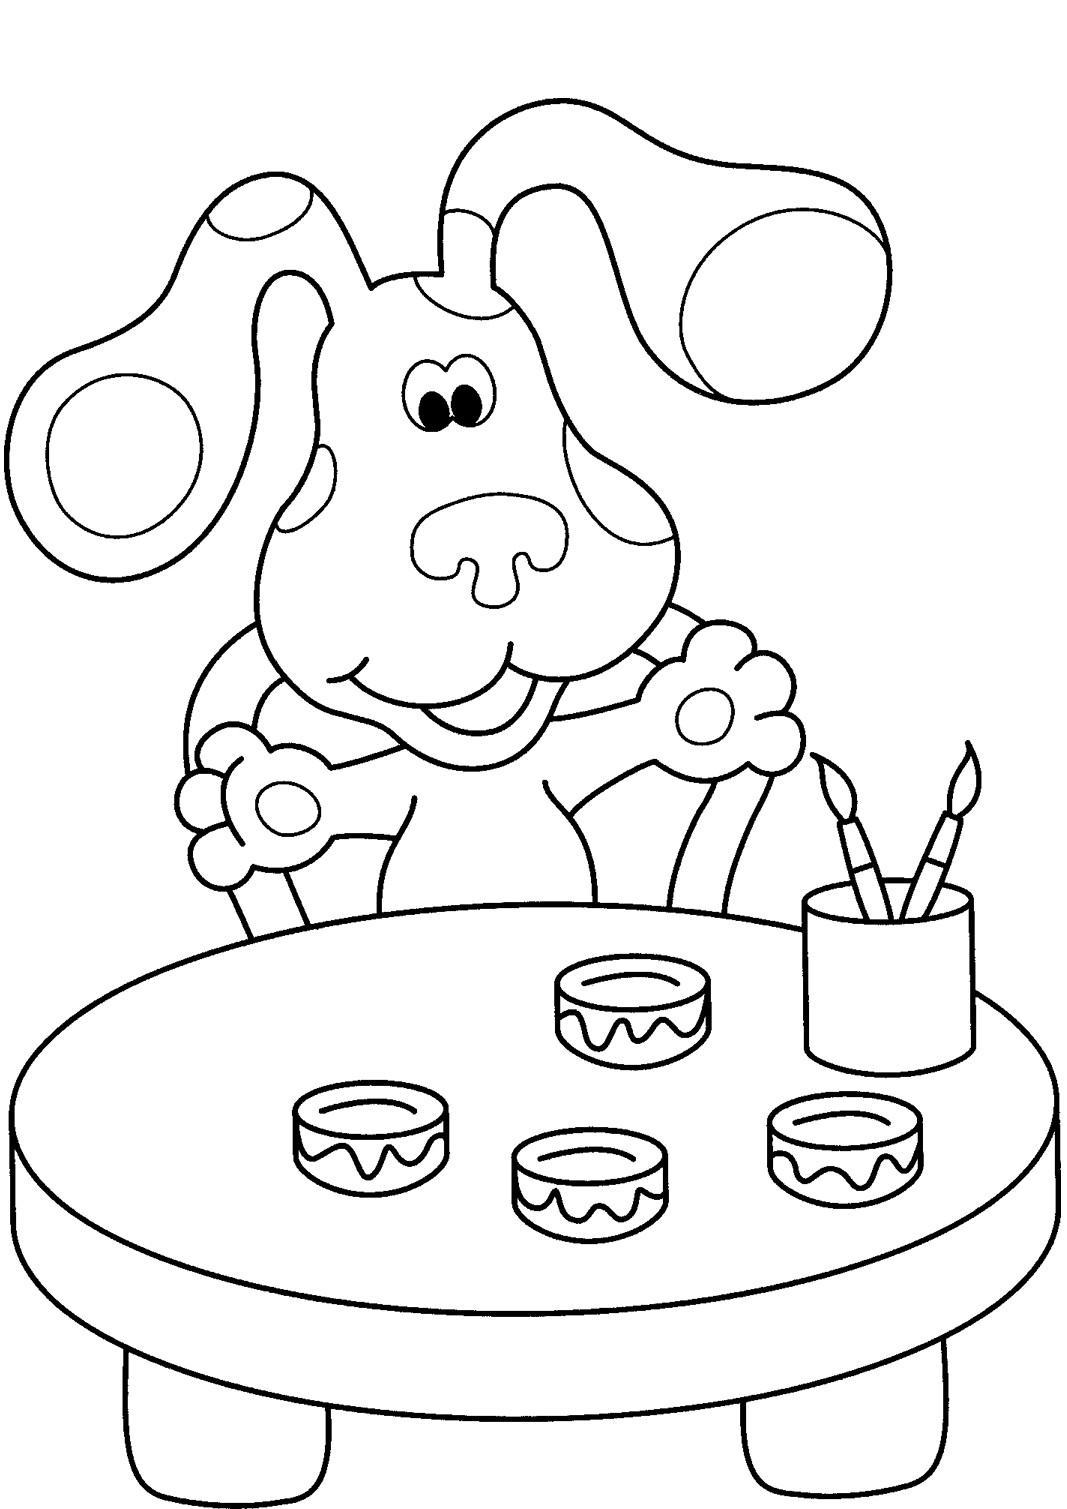 Free Printable Coloring Pages For Toddlers
 Free Printable Blues Clues Coloring Pages For Kids